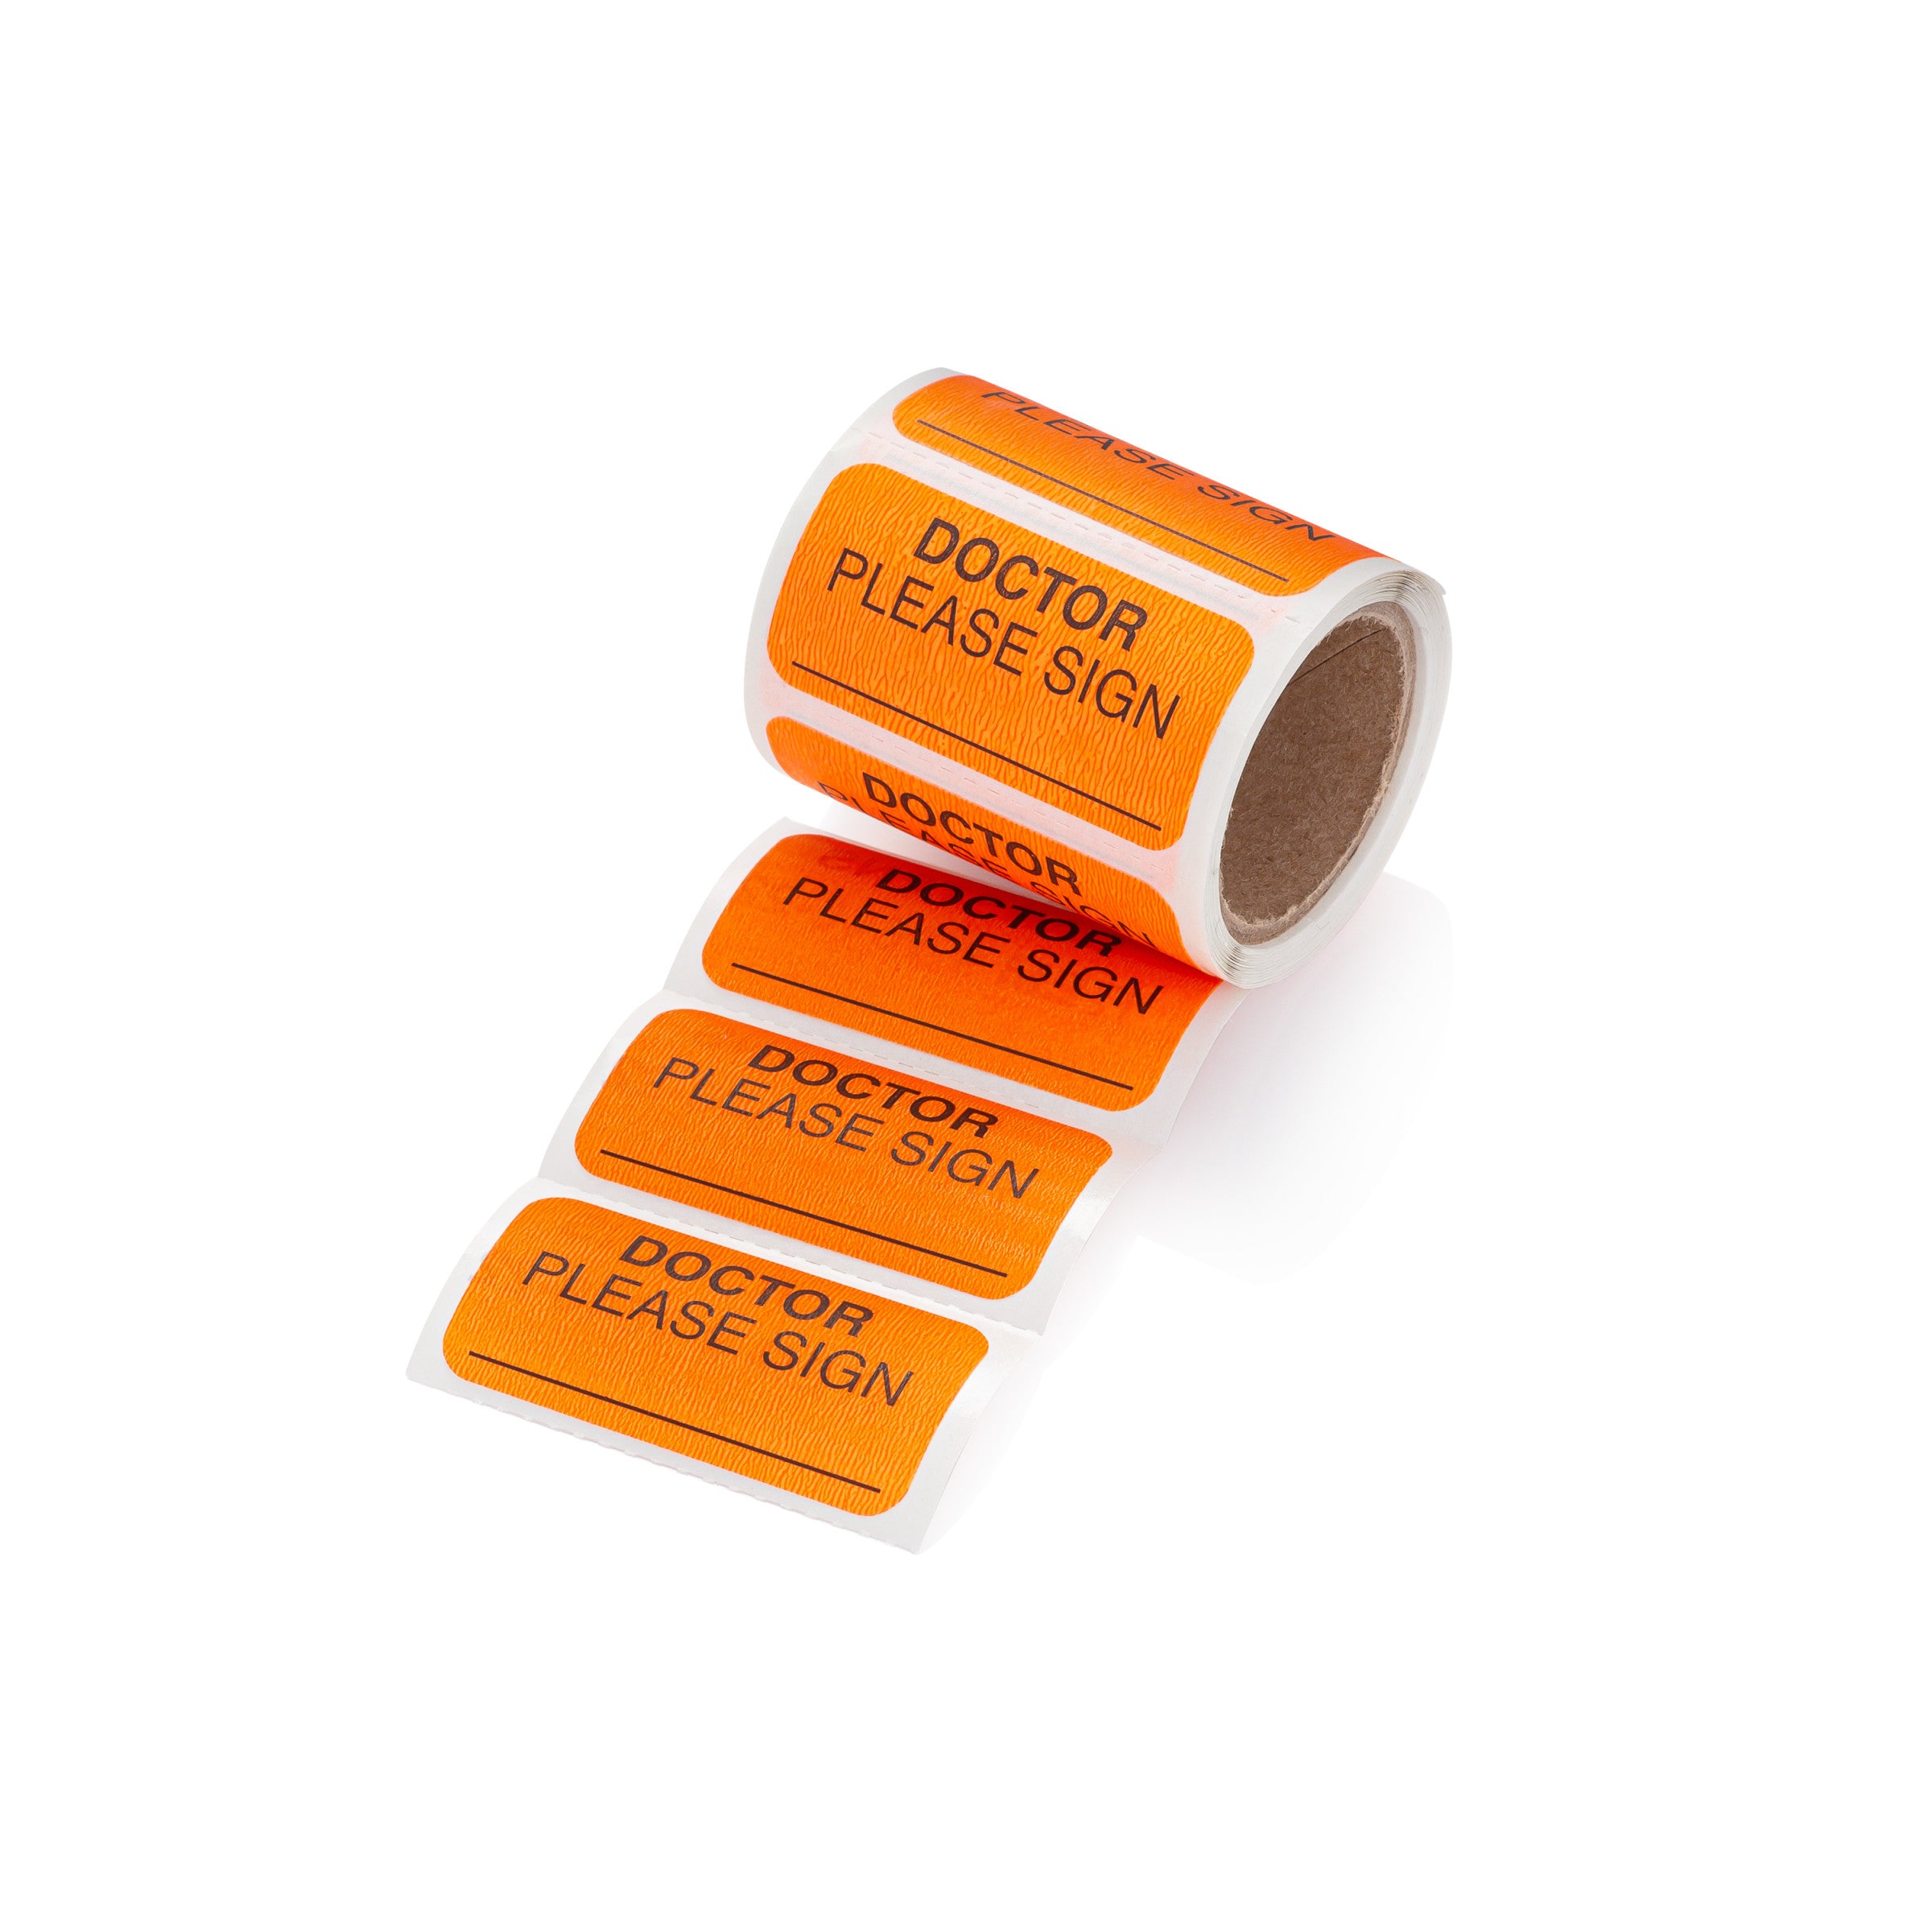 Doctor Please Sign Alert and Instruction Labels, Orange, W1.5" x H.75" (Roll of 100)